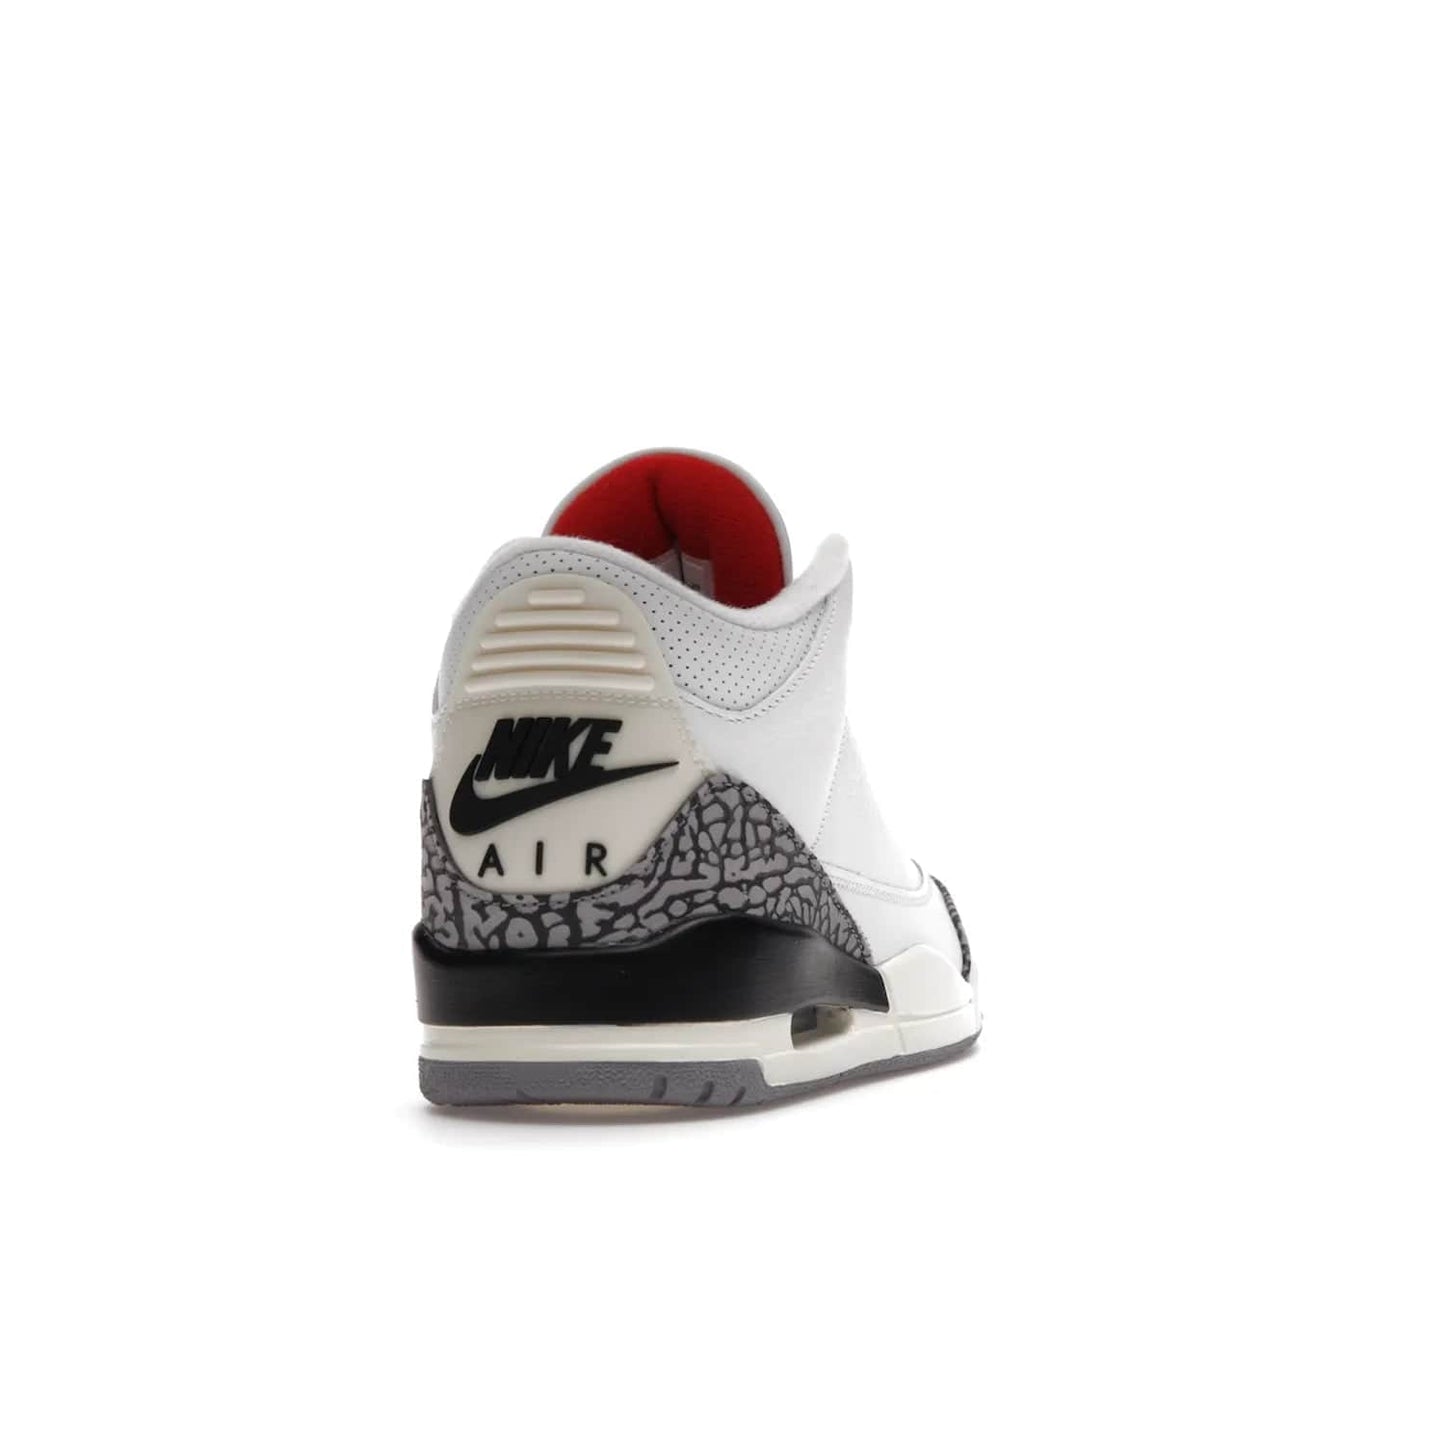 Jordan 3 Retro White Cement Reimagined - Image 30 - Only at www.BallersClubKickz.com - The Reimagined Air Jordan 3 Retro in a Summit White/Fire Red/Black/Cement Grey colorway is launching on March 11, 2023. Featuring a white leather upper, off-white midsoles and heel tabs, this vintage-look sneaker is a must-have.